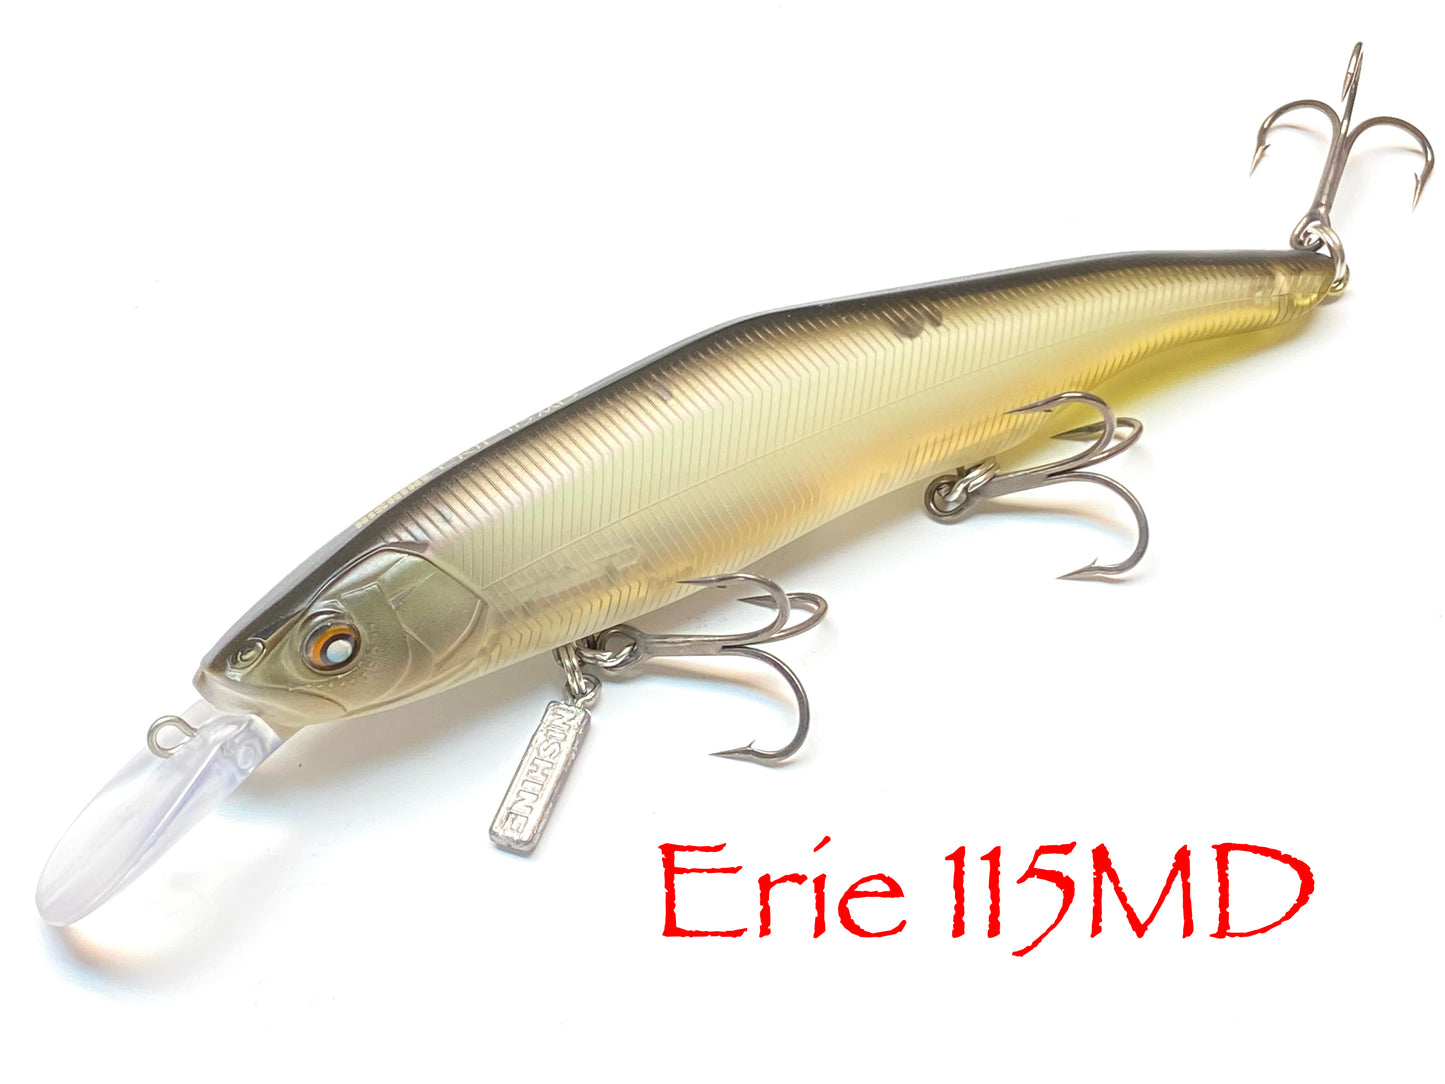 Erie115MD